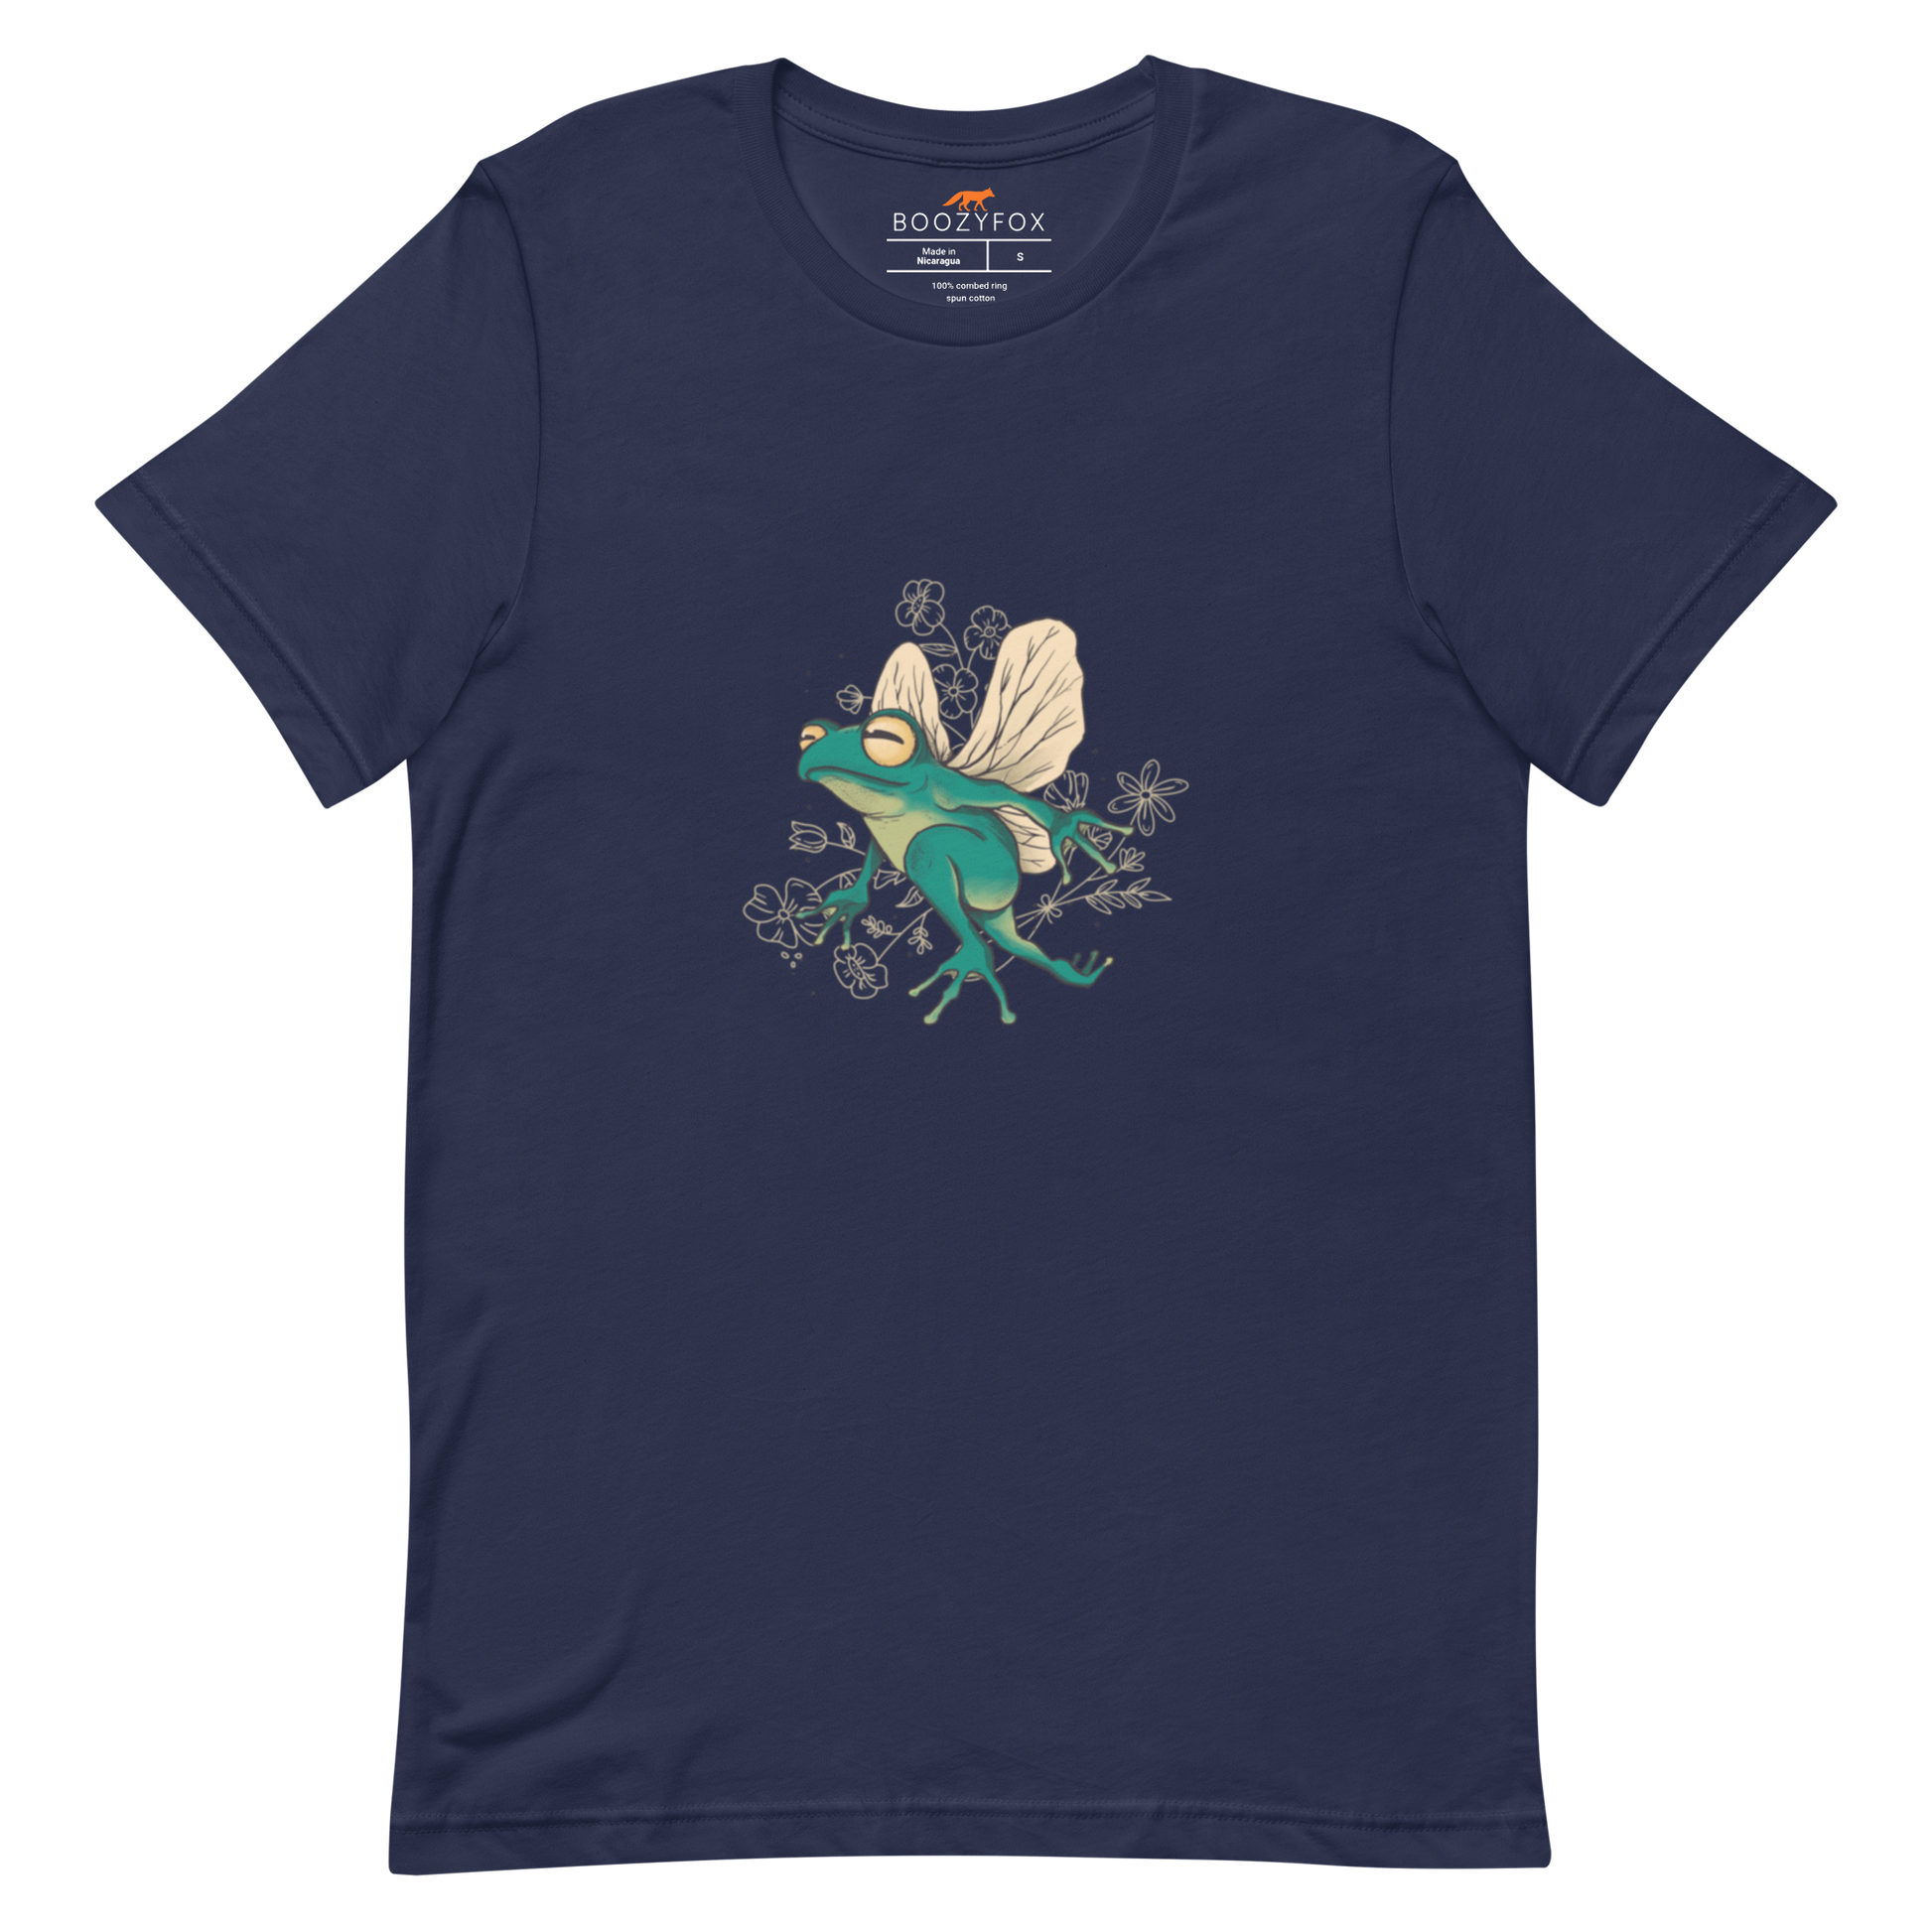 Navy Premium Frog T-Shirt featuring an adorable Fairy Frog graphic on the chest - Funny Graphic Frog Tees - Boozy Fox